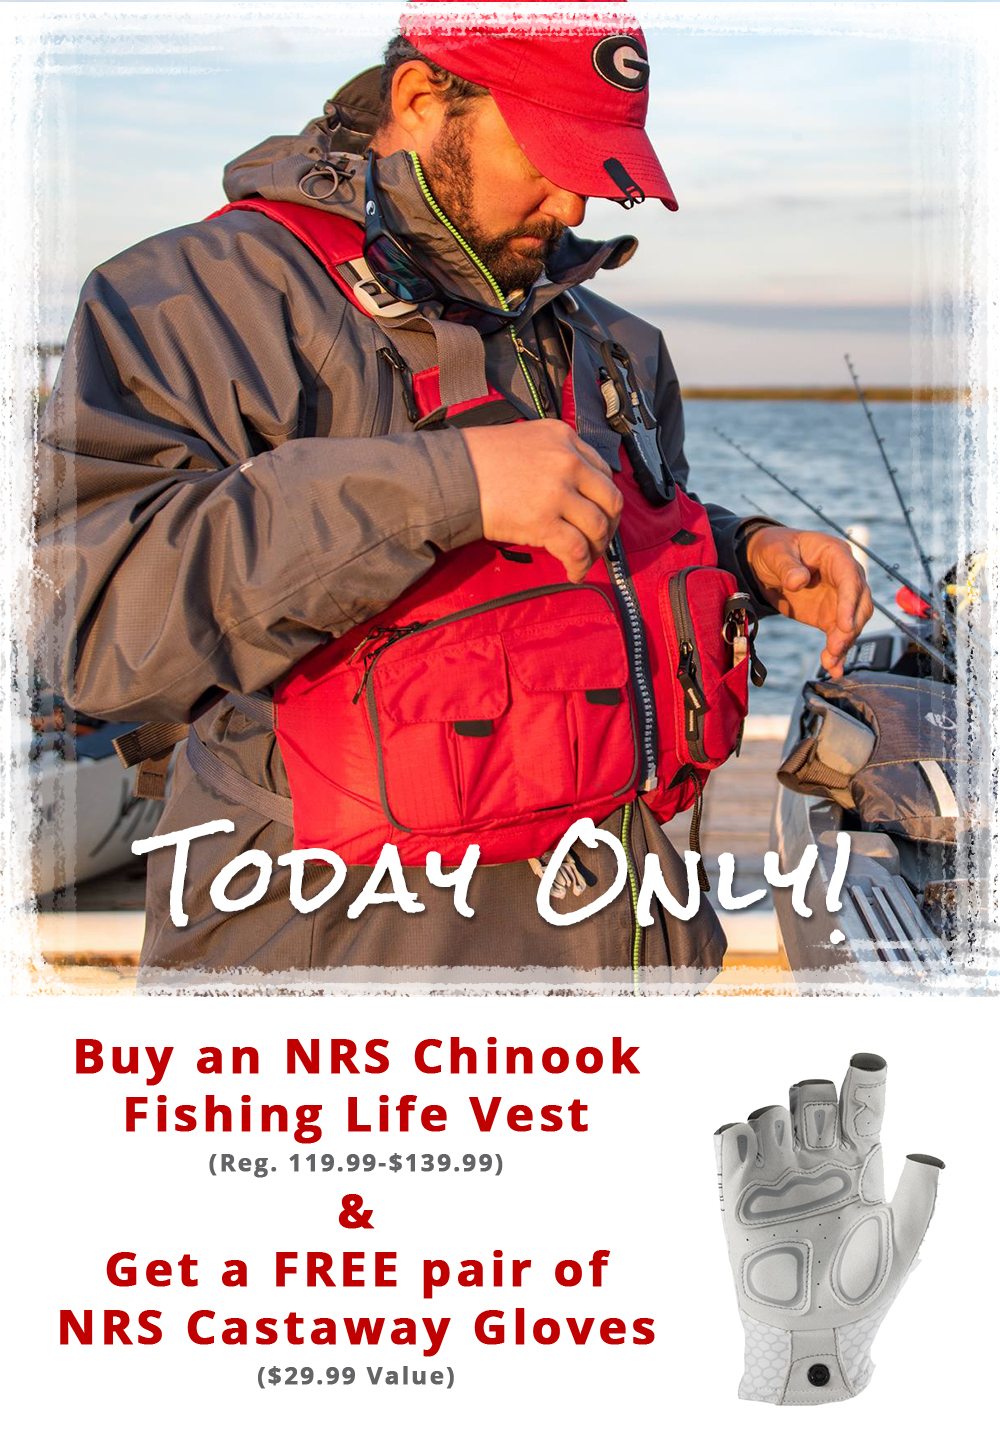 Buy an NRS Chinook Fishing Life Vest & Get a FREE pair of NRS Castaway Gloves!